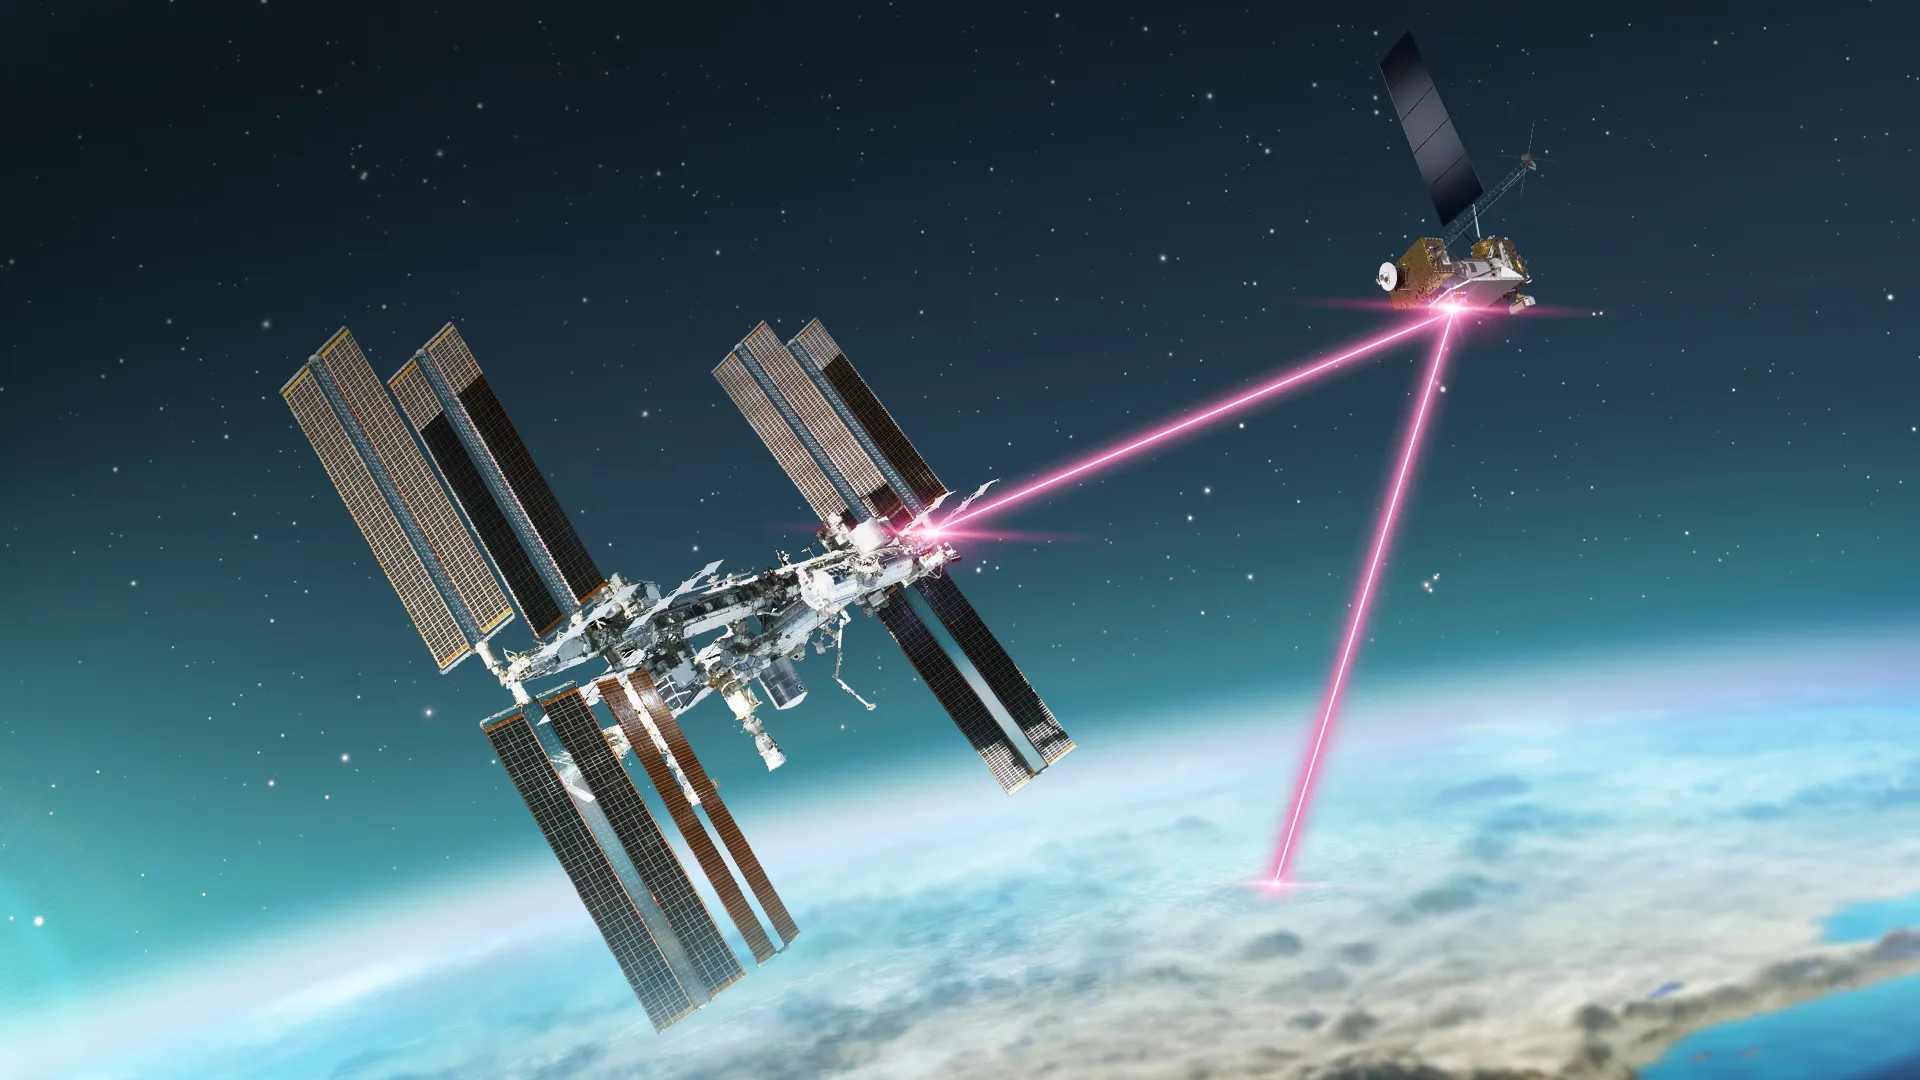 Groundbreaking laser communications experiment flying to ISS on SpaceX cargo mission next month